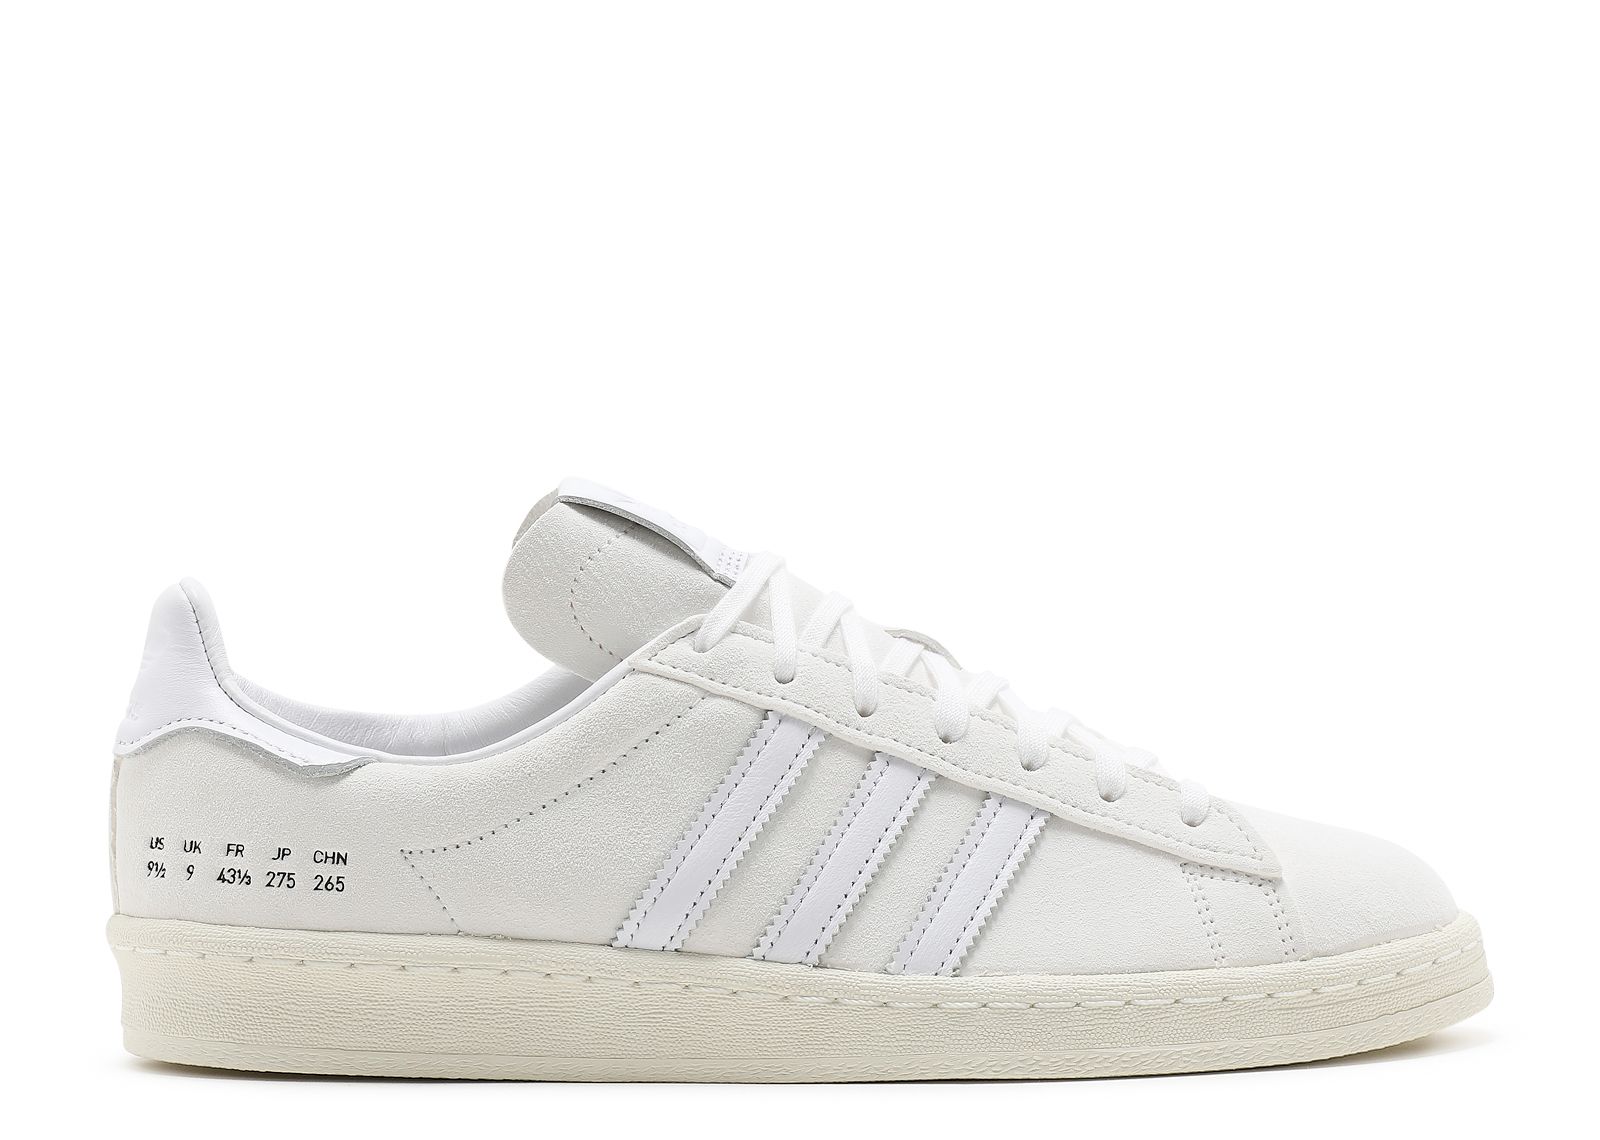 Campus 80s 'Size Tag Off White' - Adidas - FY5467 - white/cloud